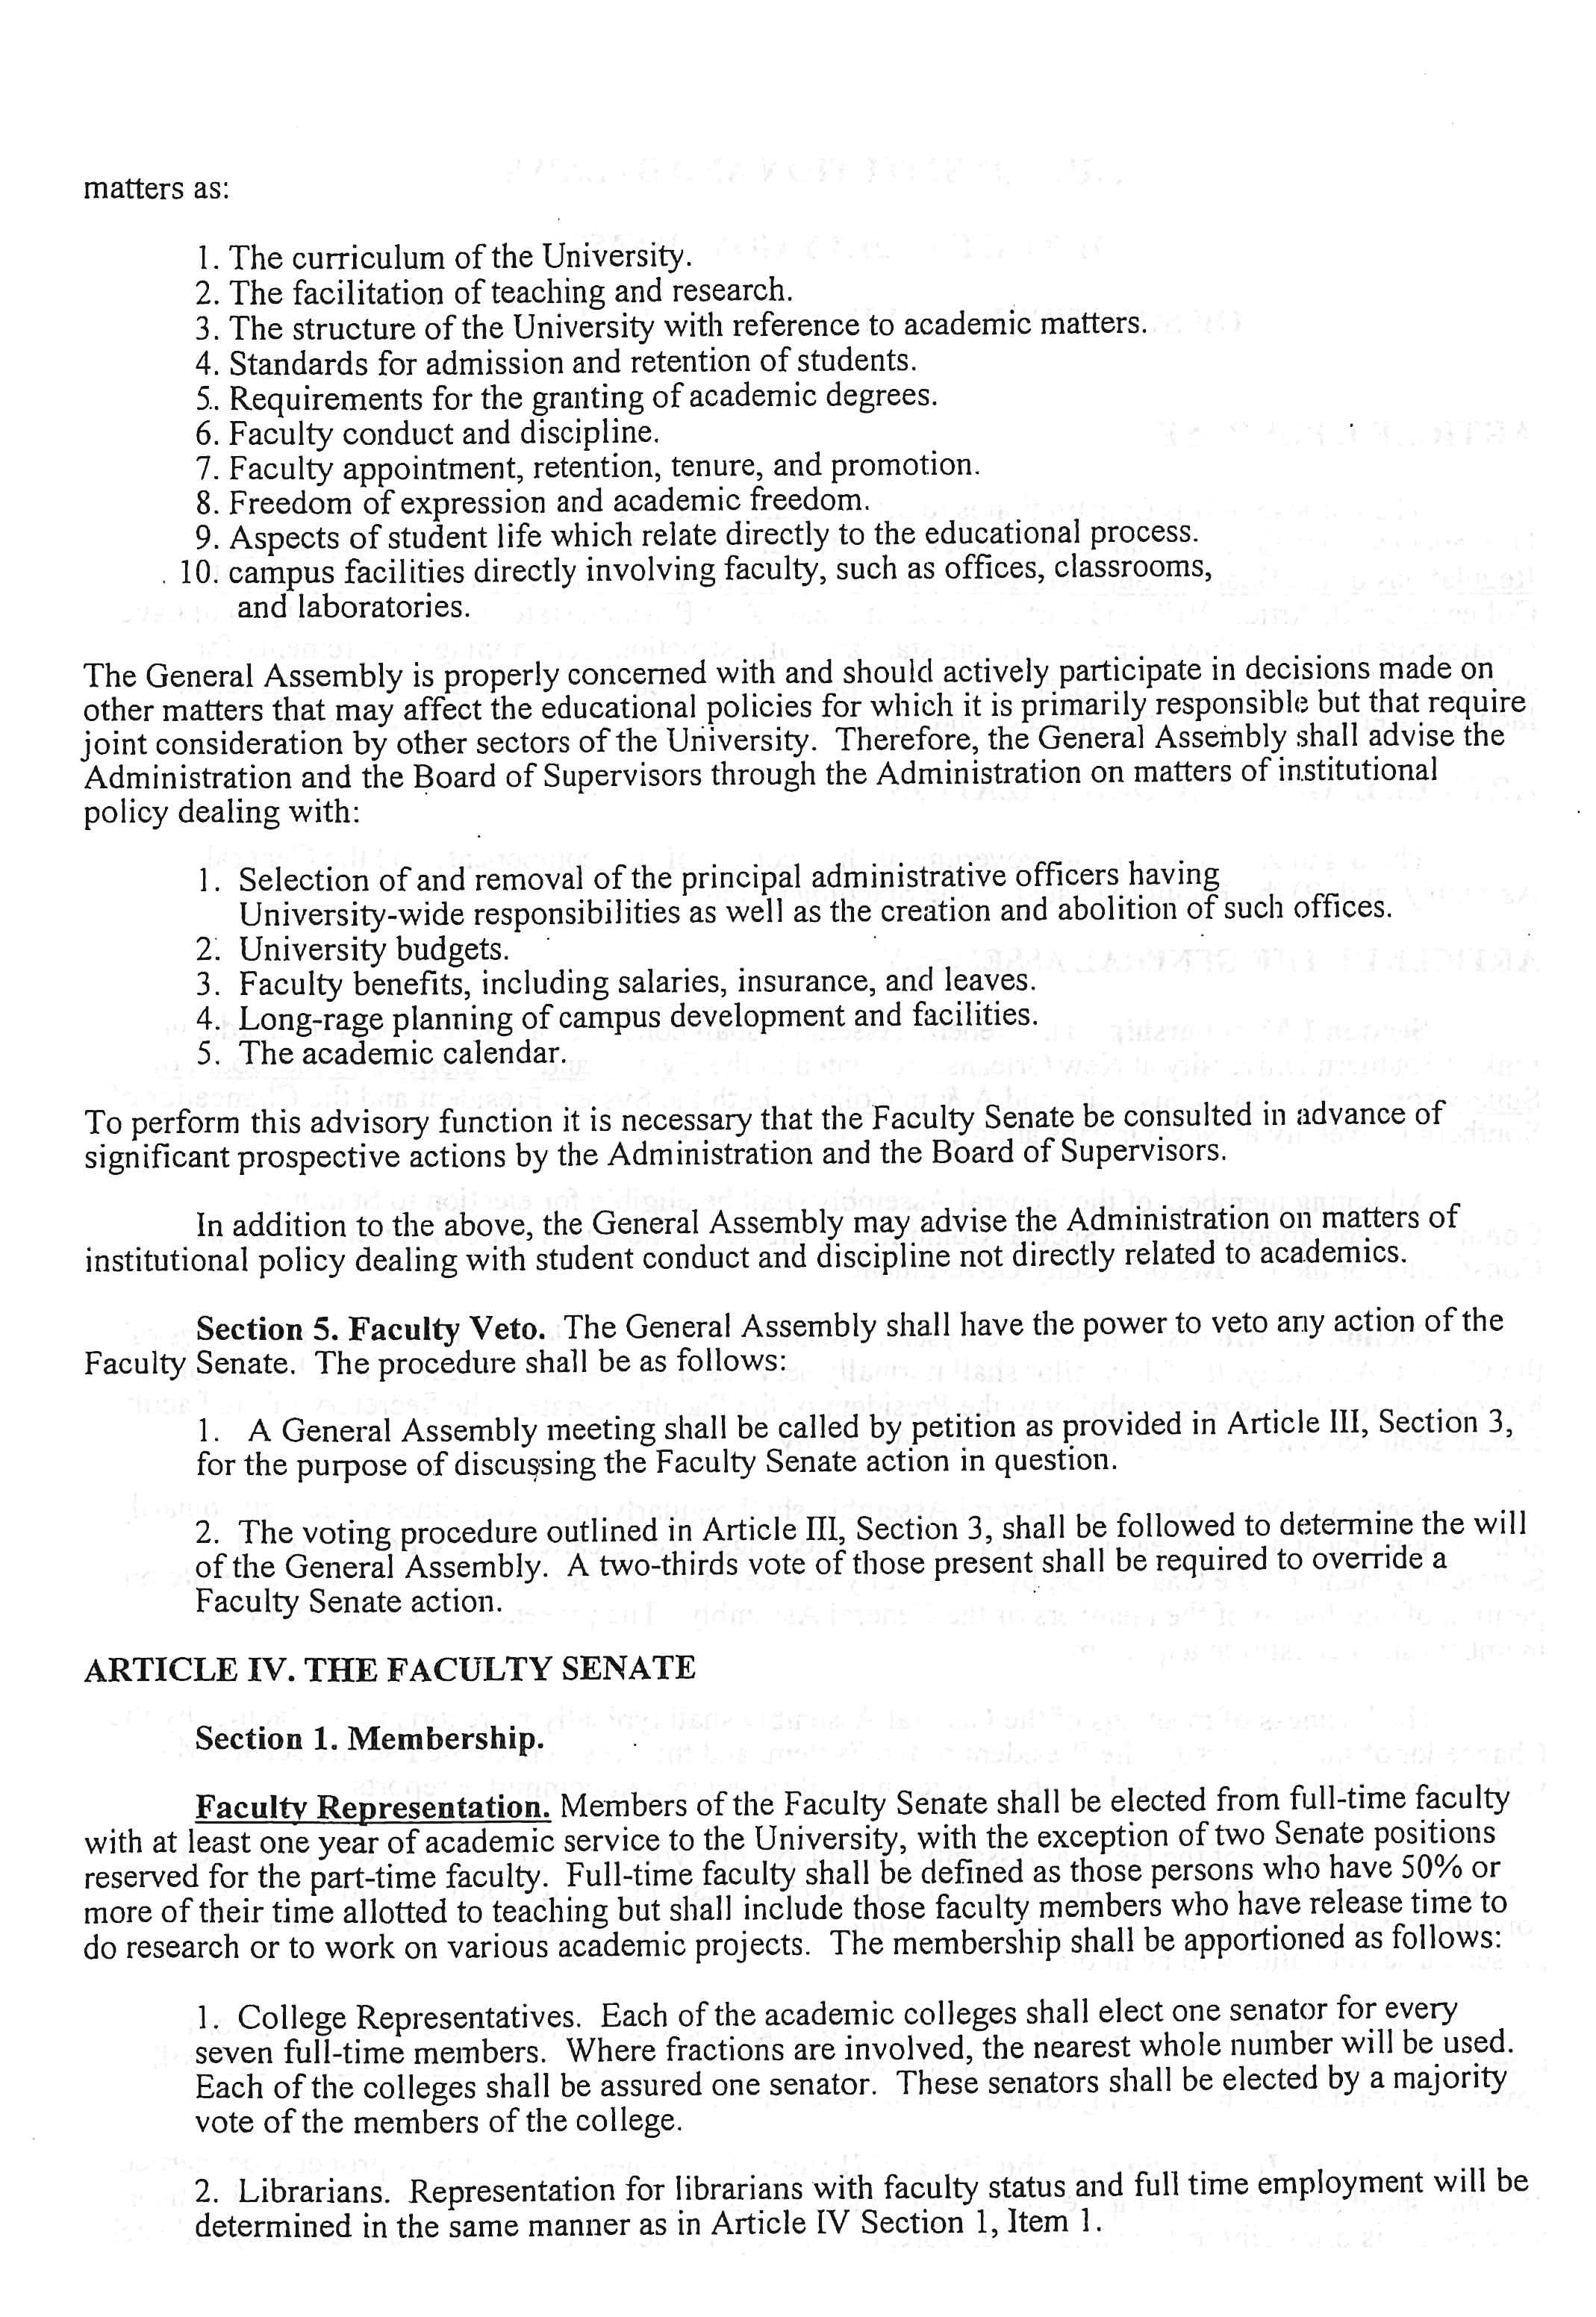 Constitution and Bylaws - Page 2